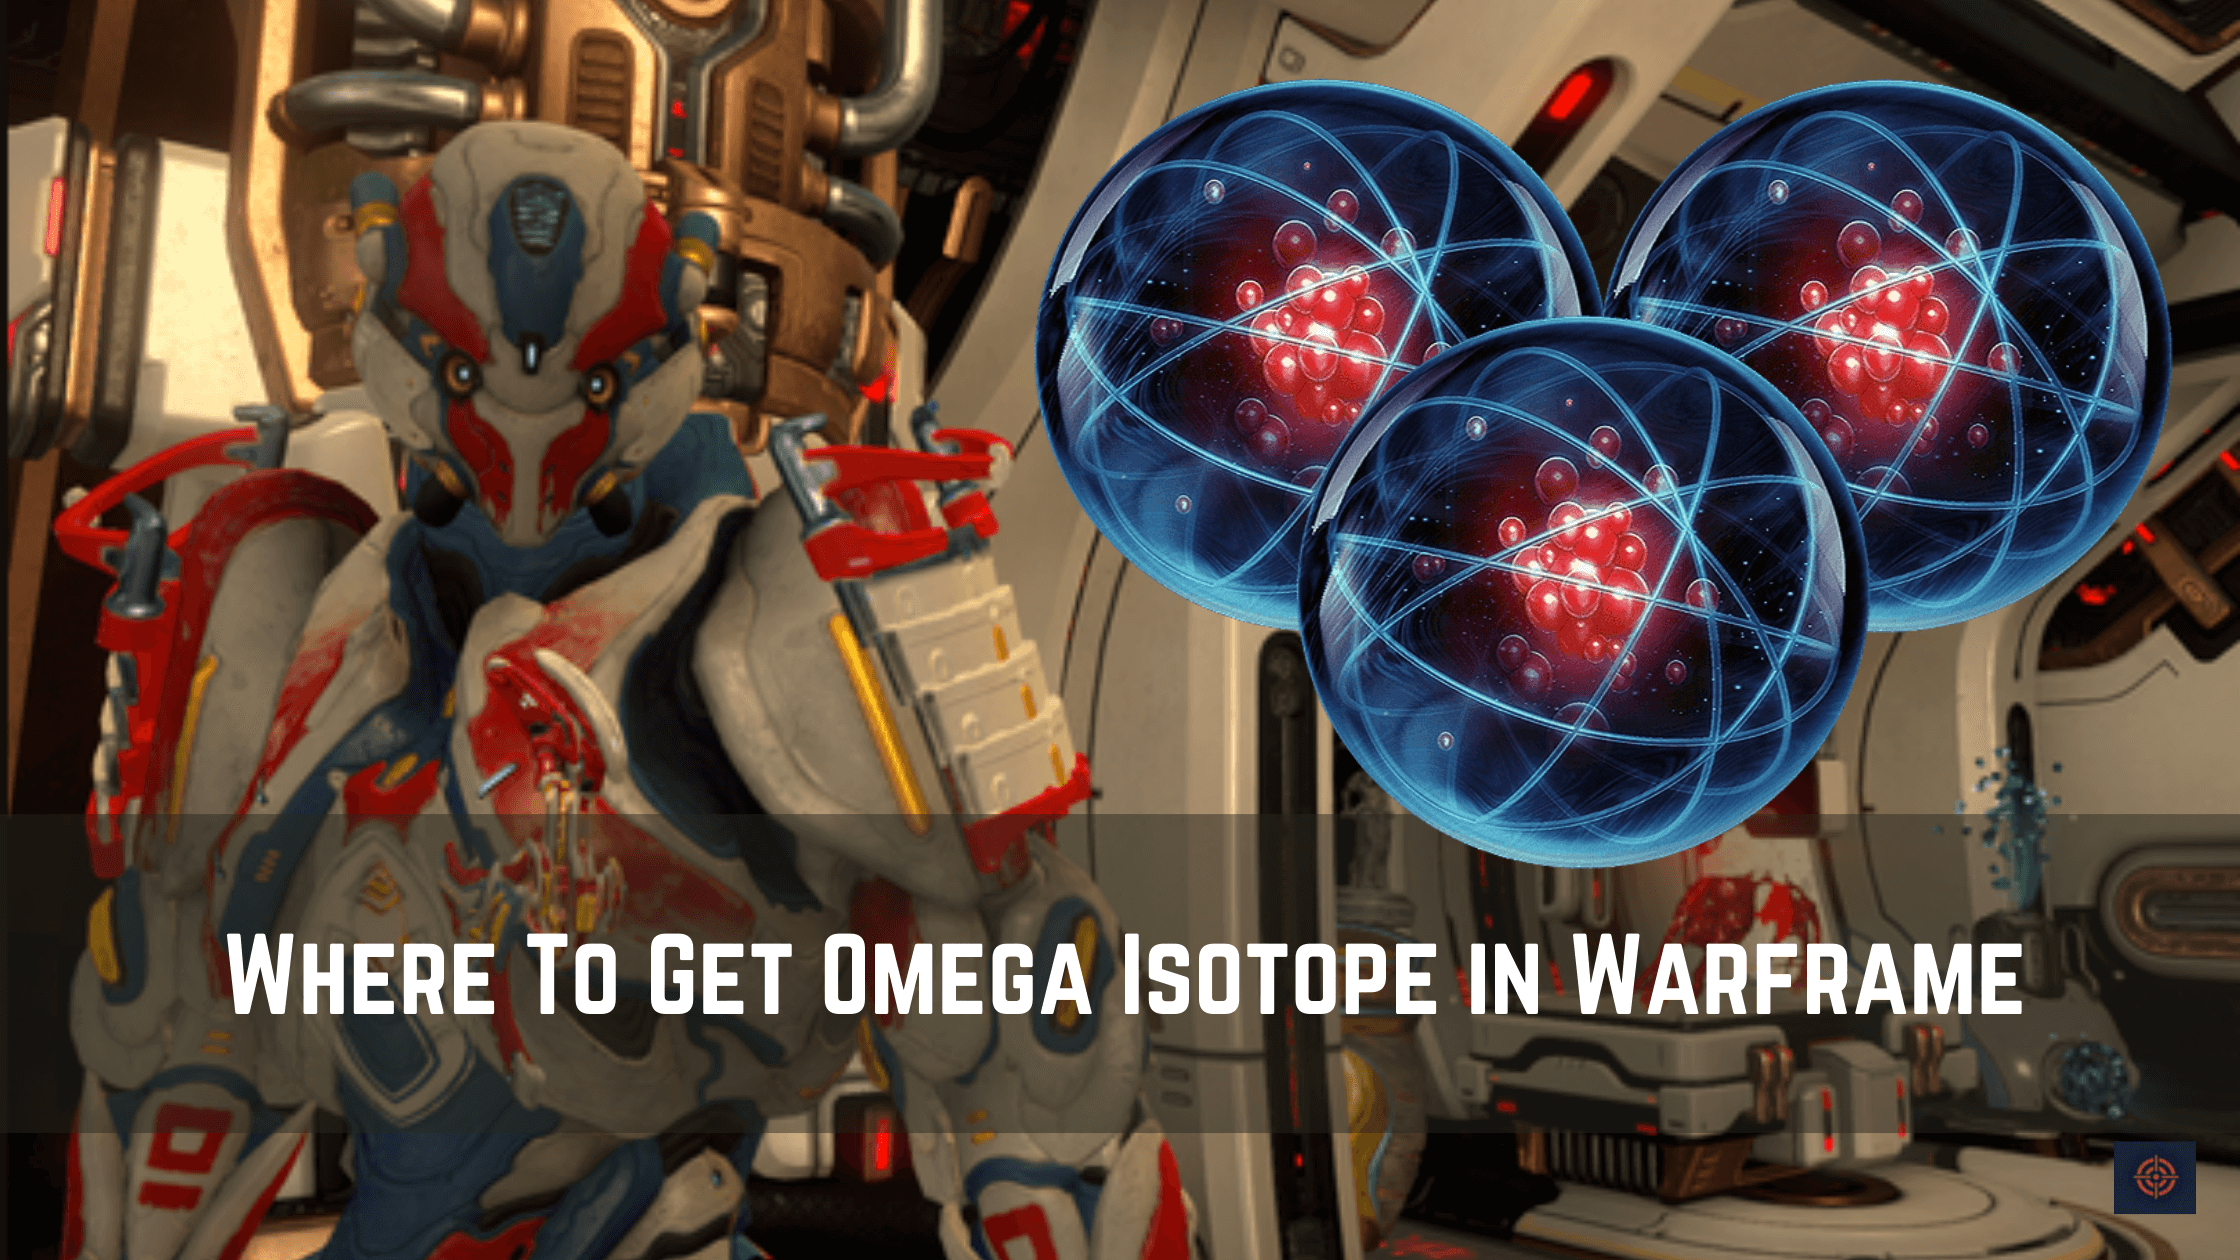 where to get omega isotope warframe